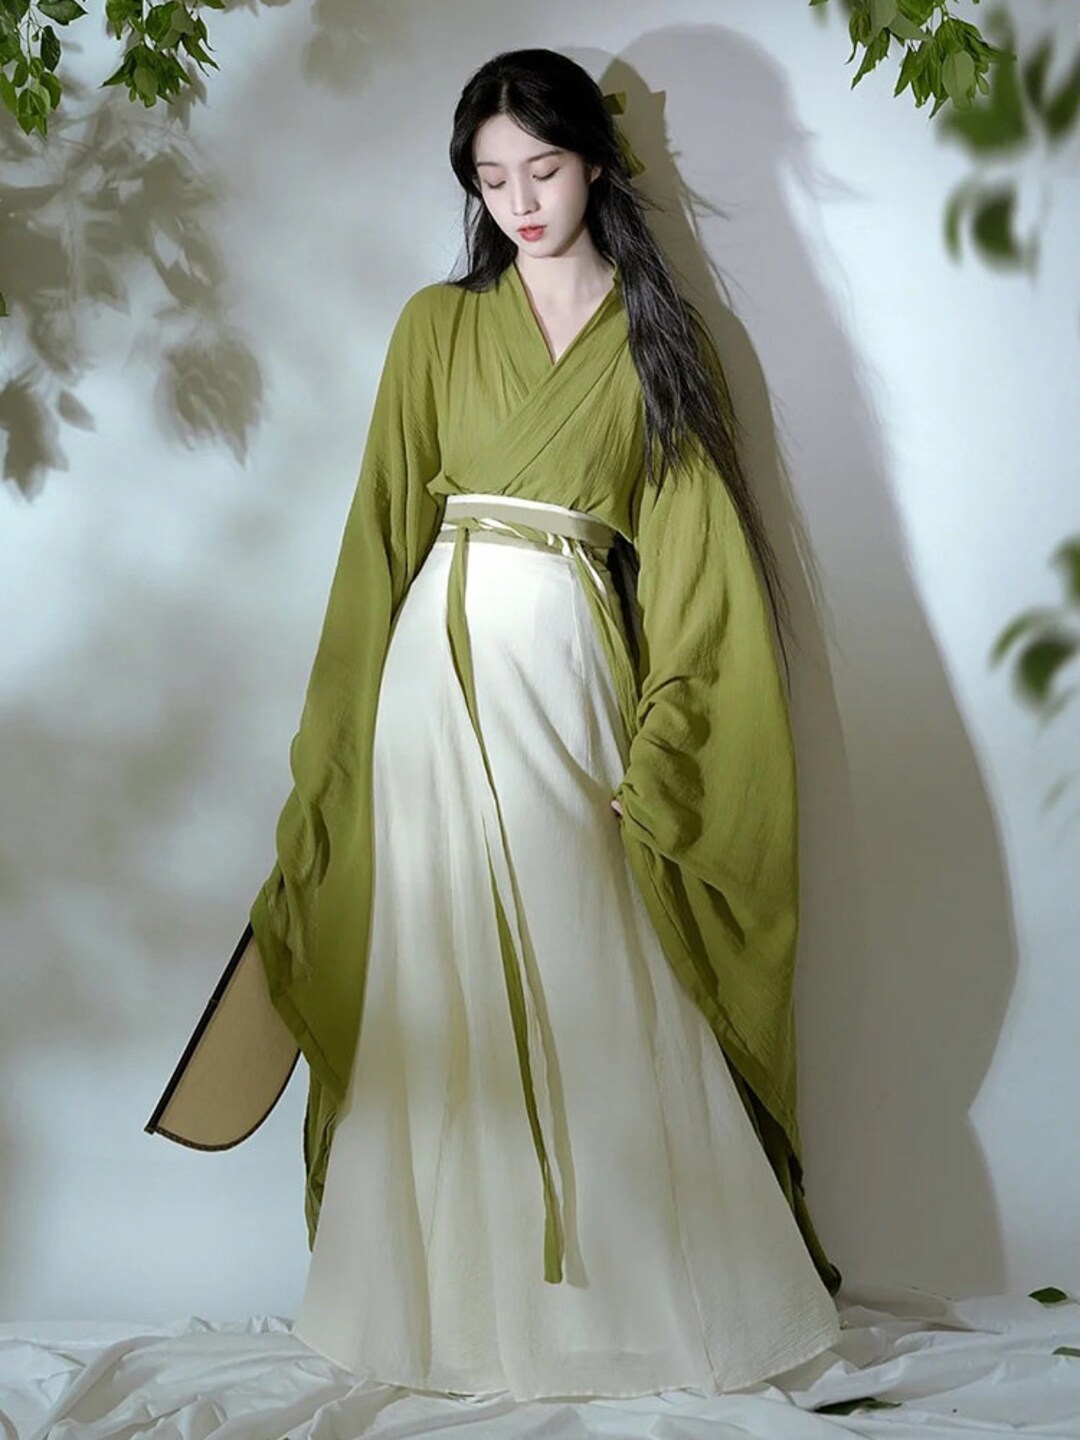 Wei Jin Southern and Northern Dynasties Historical Costume - Etsy